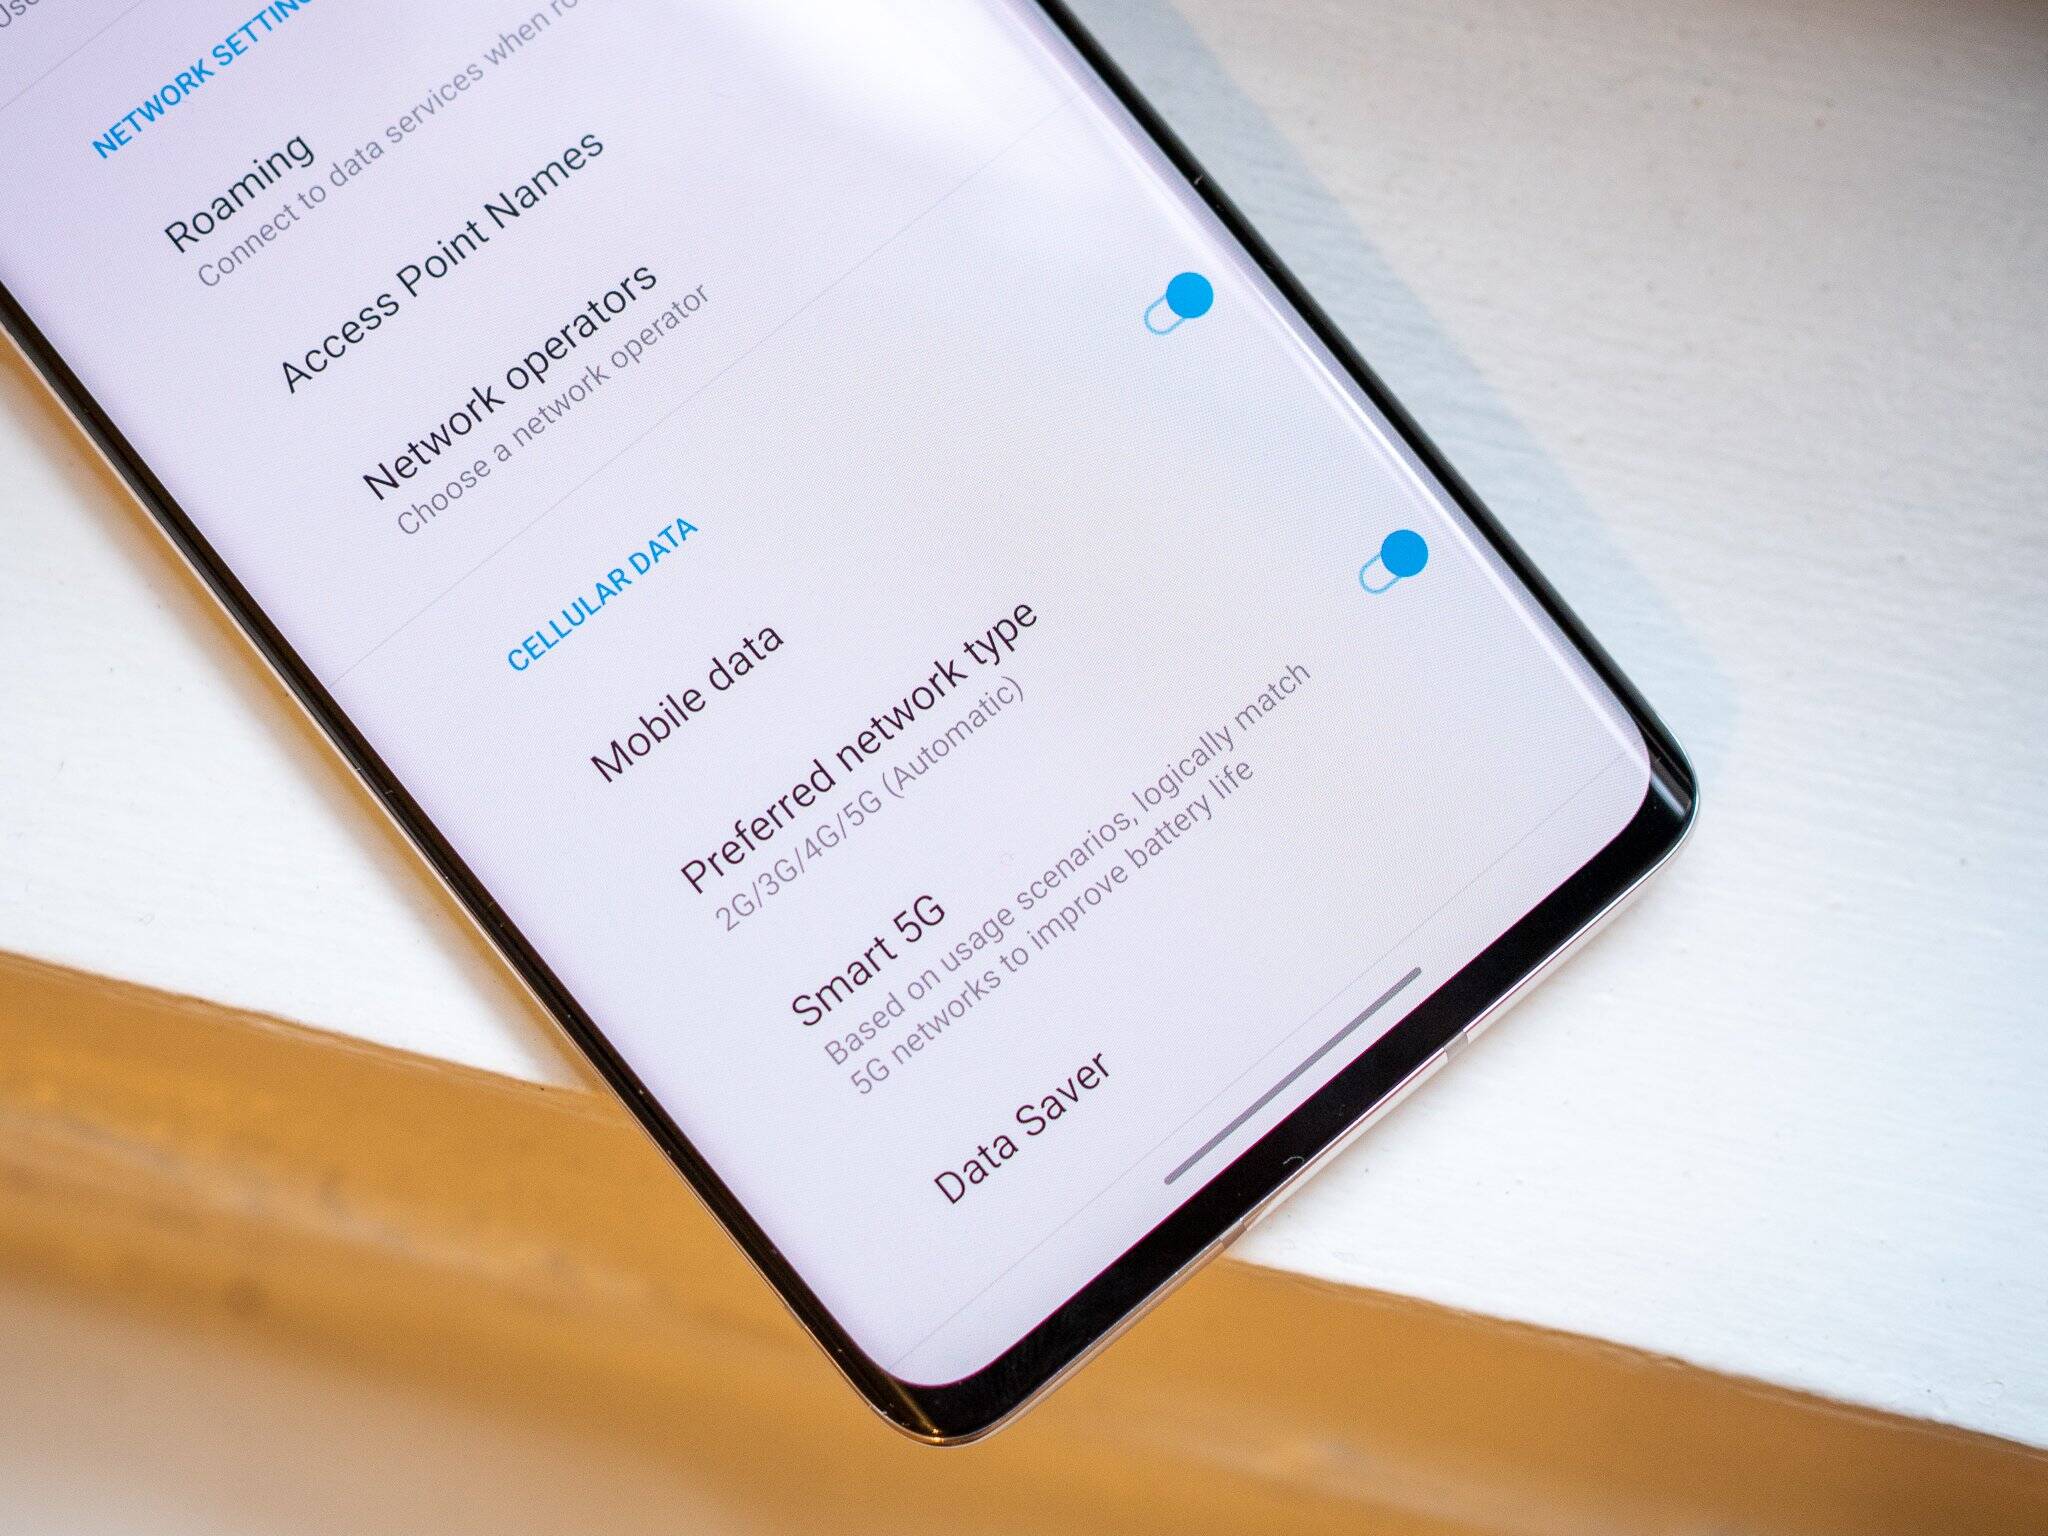 Connectivity Boost: Enabling 5G On OnePlus 8 Pro